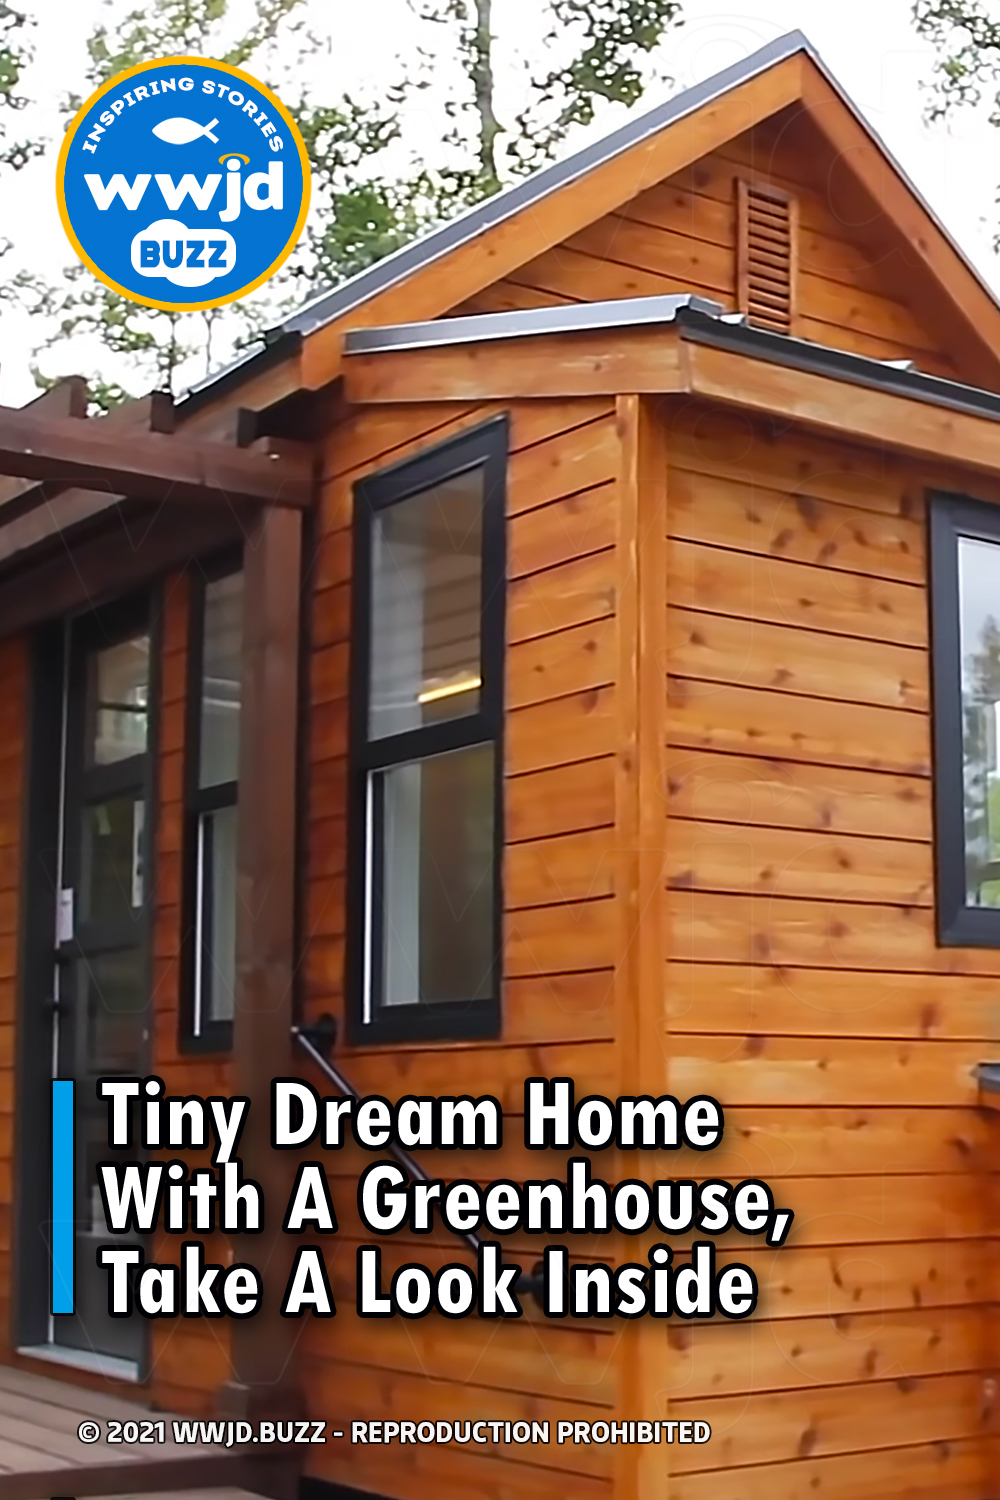 Tiny Dream Home With A Greenhouse, Take A Look Inside